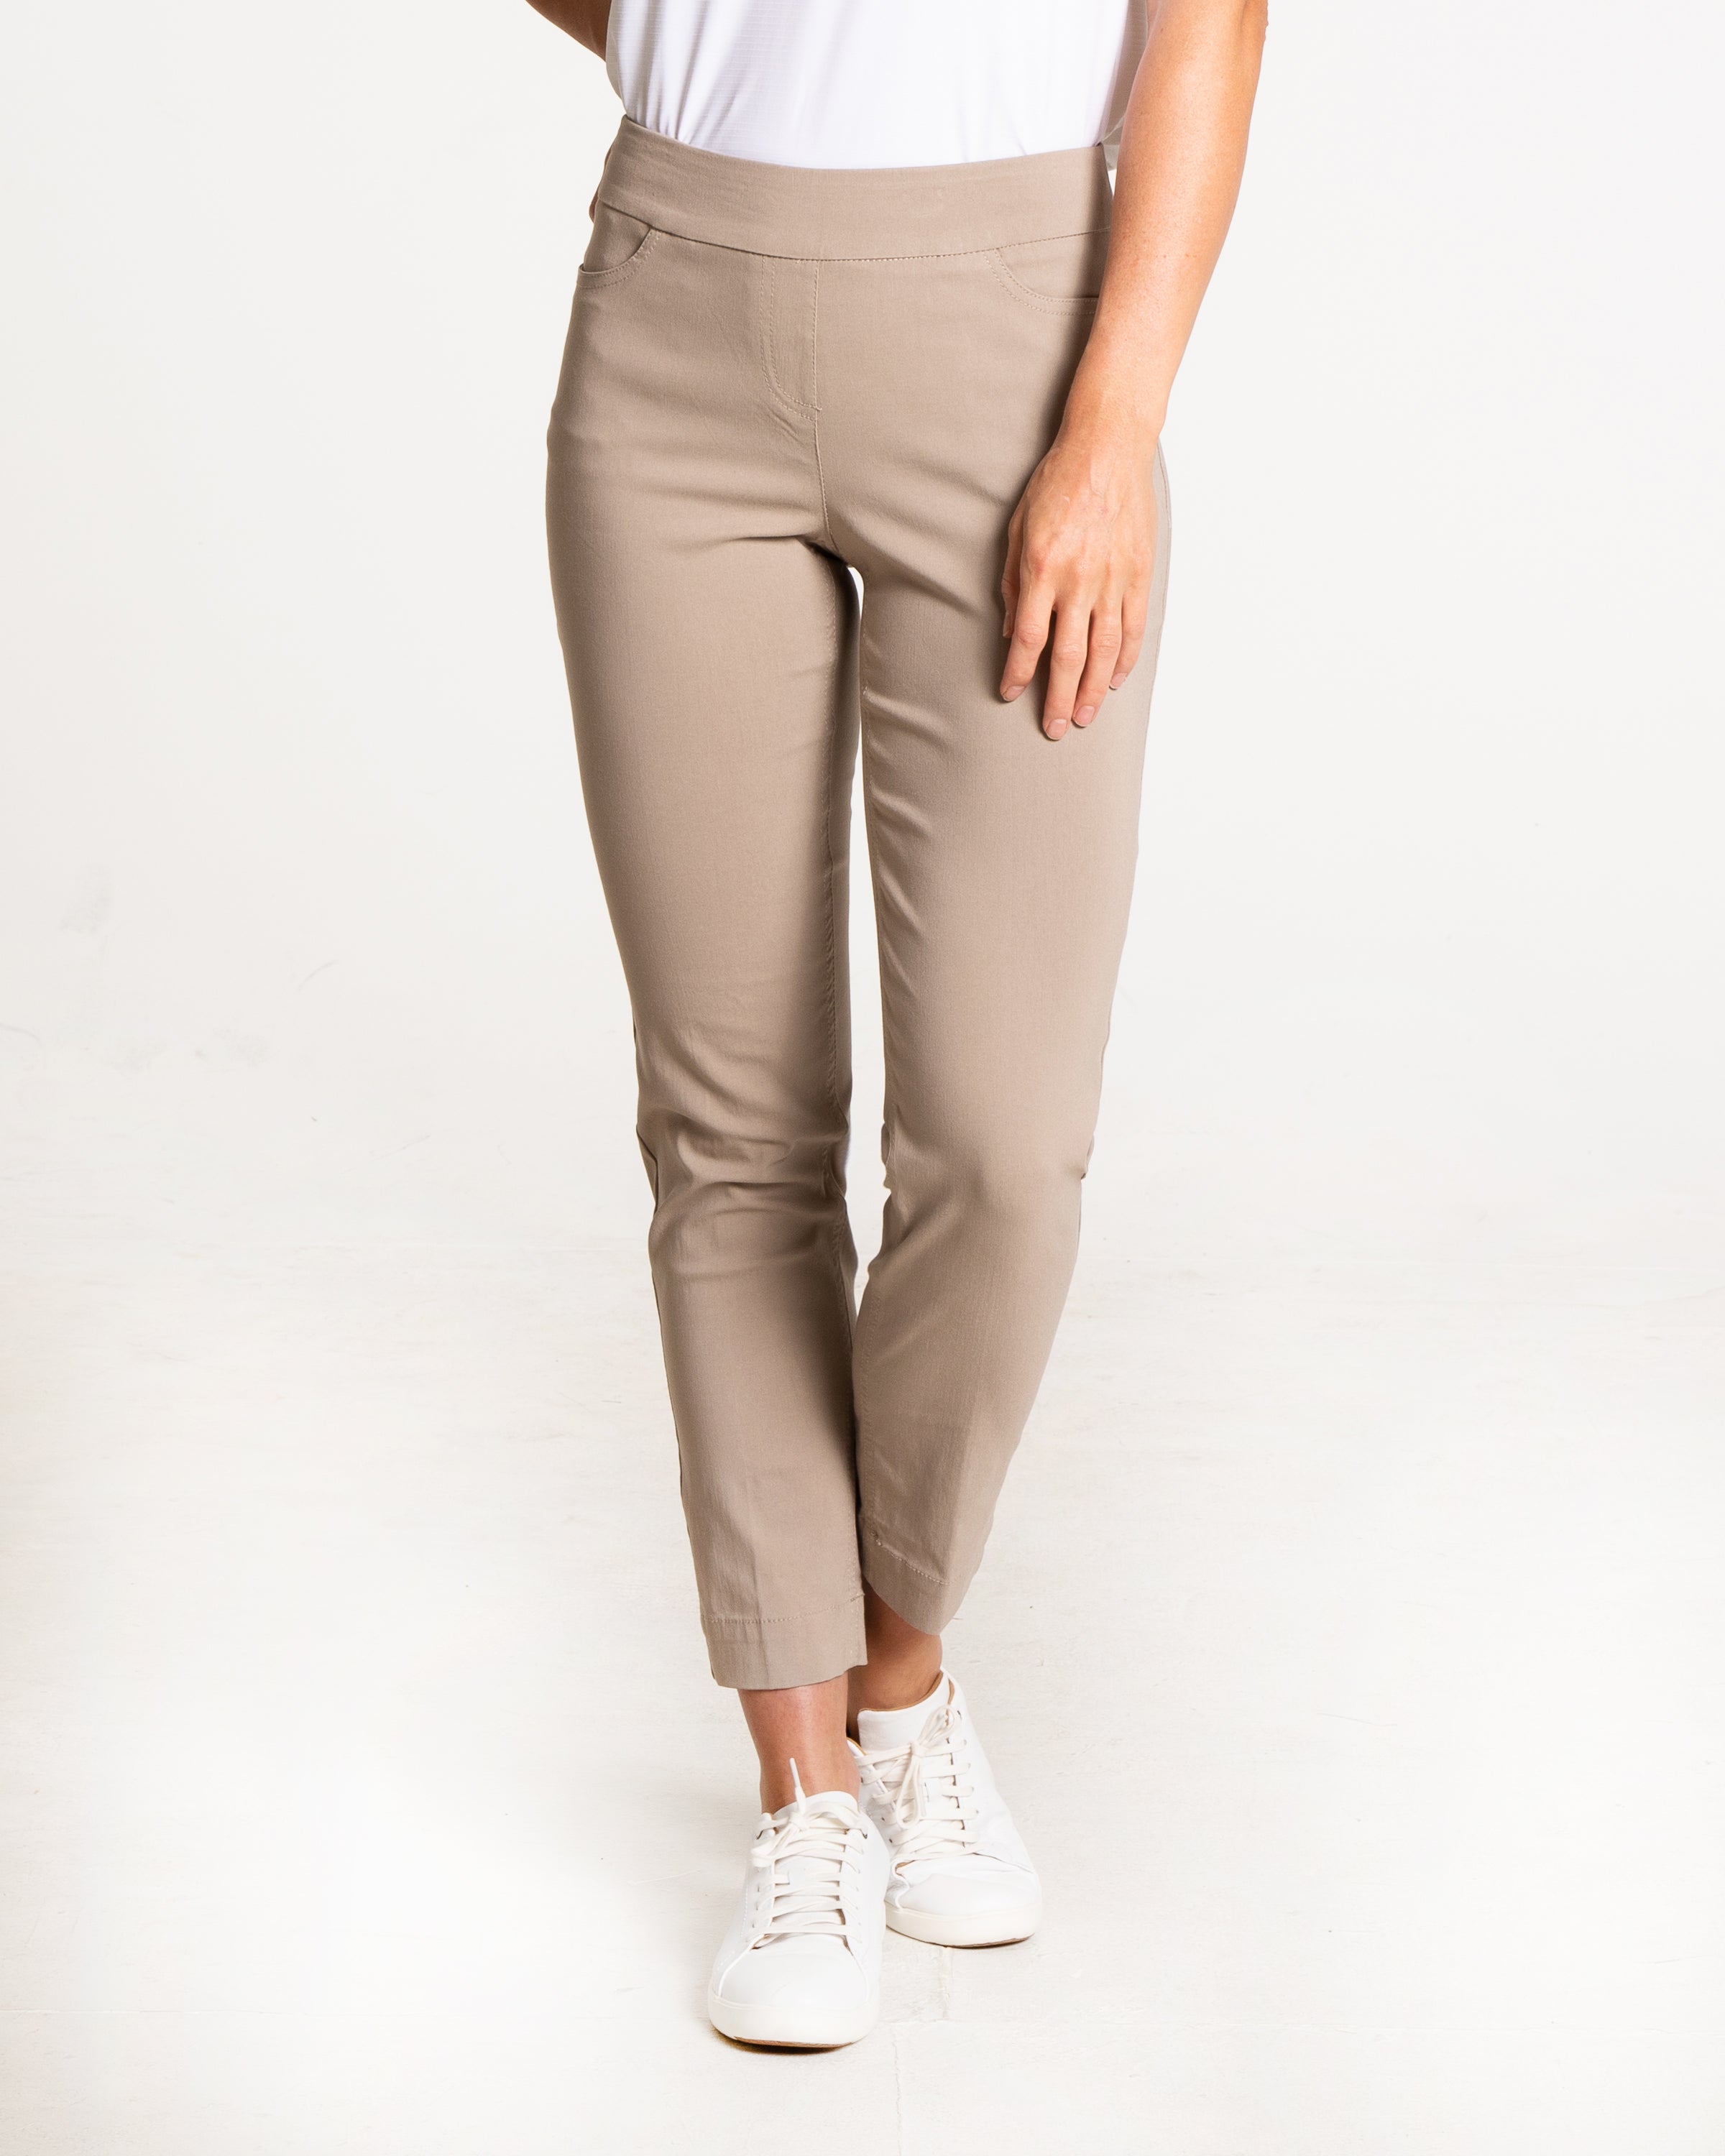 Golf Ankle Pant